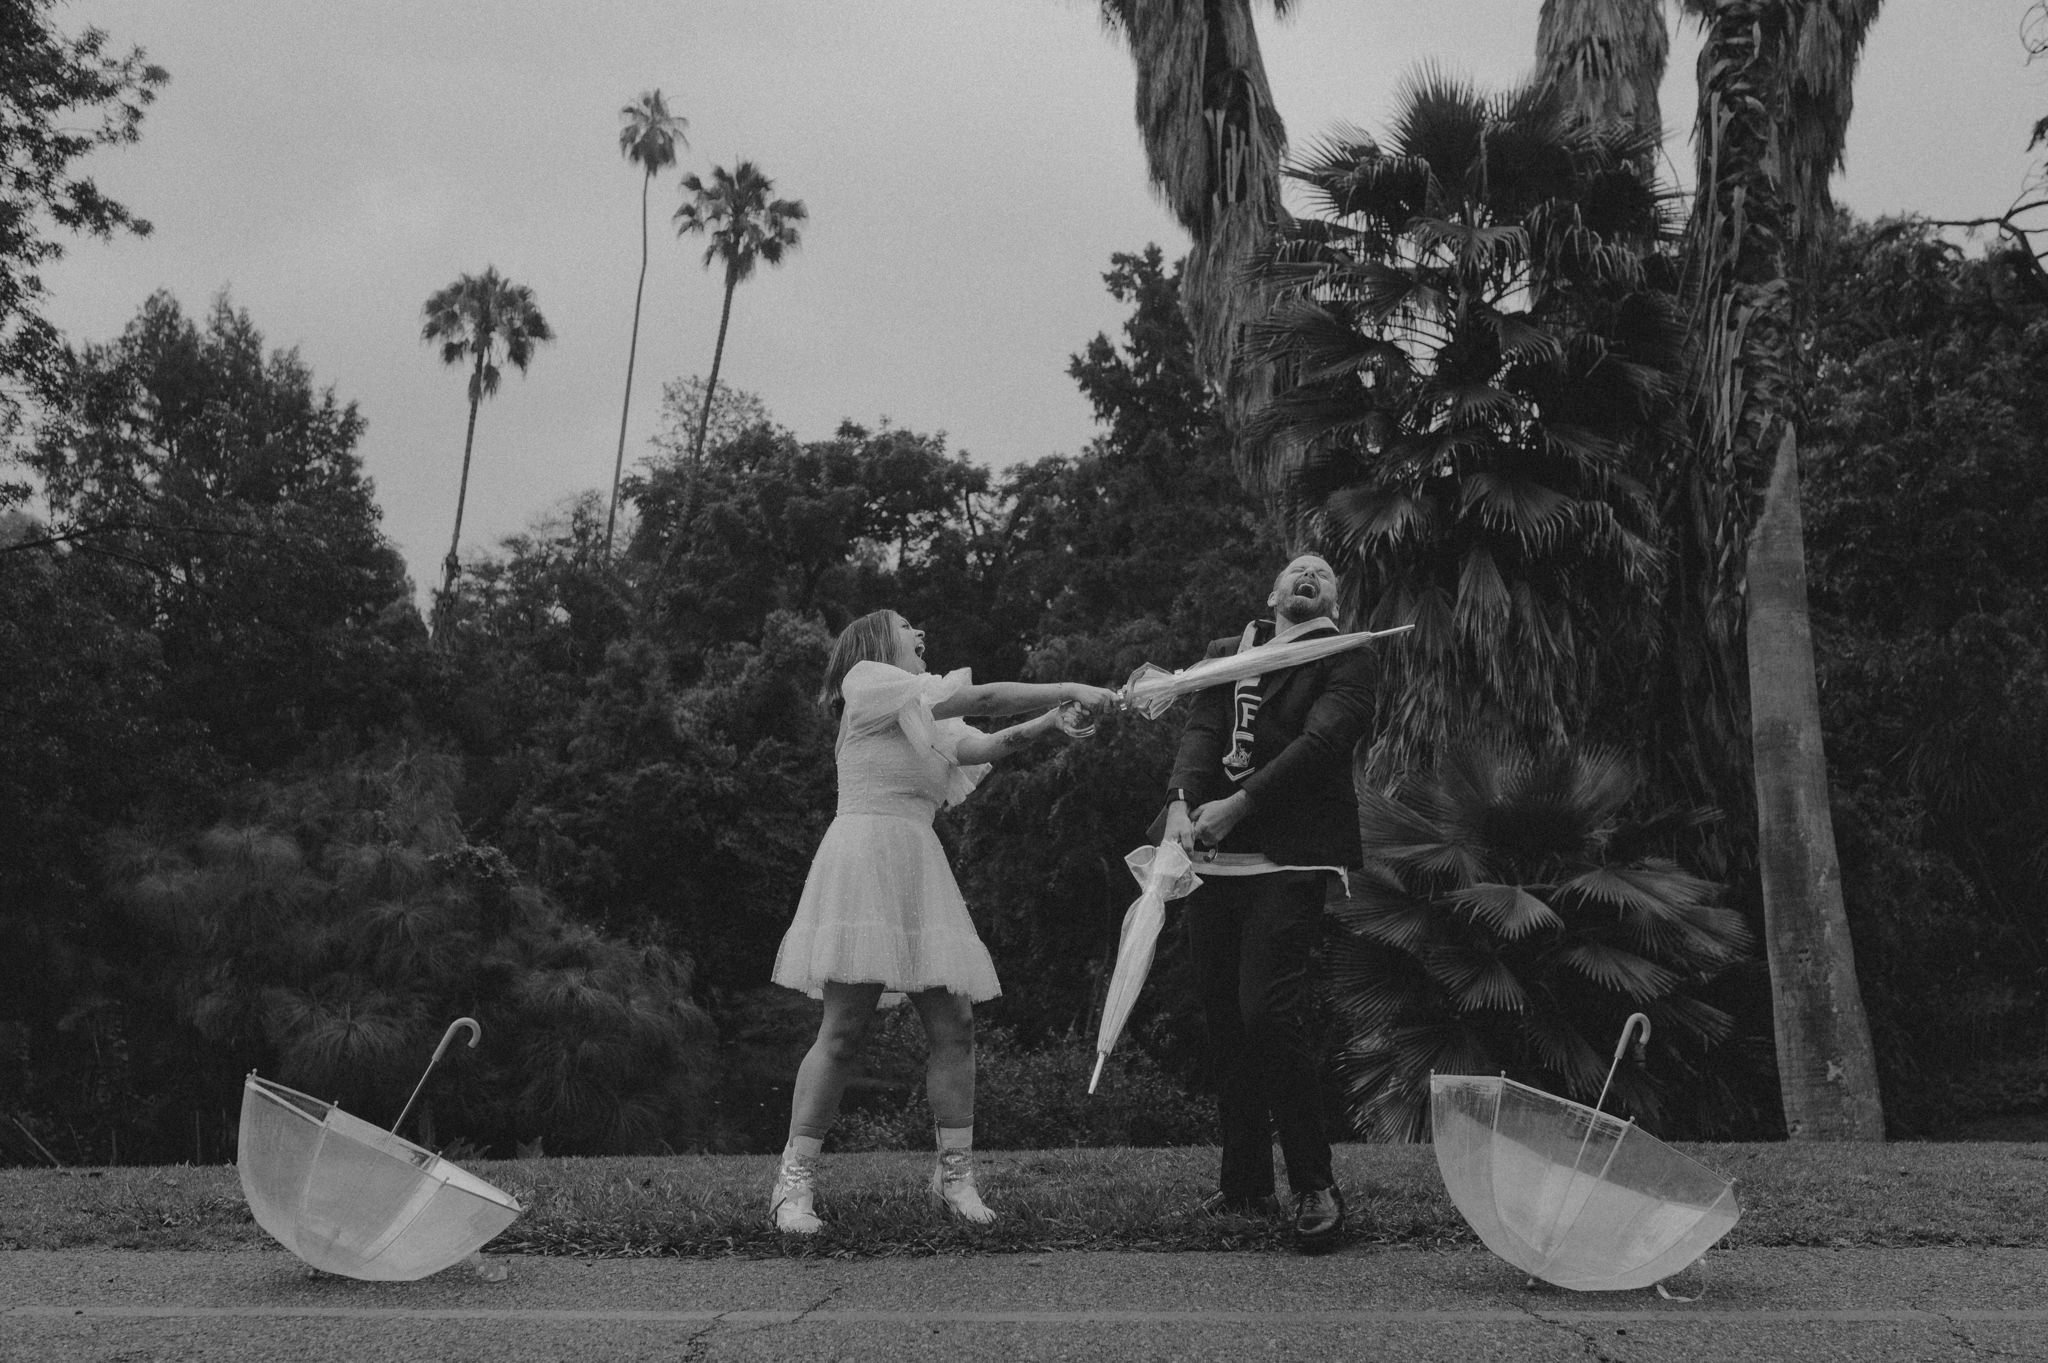 queer wedding photographers in los angeles - candid engagement session - itlaphoto.com-66.jpg